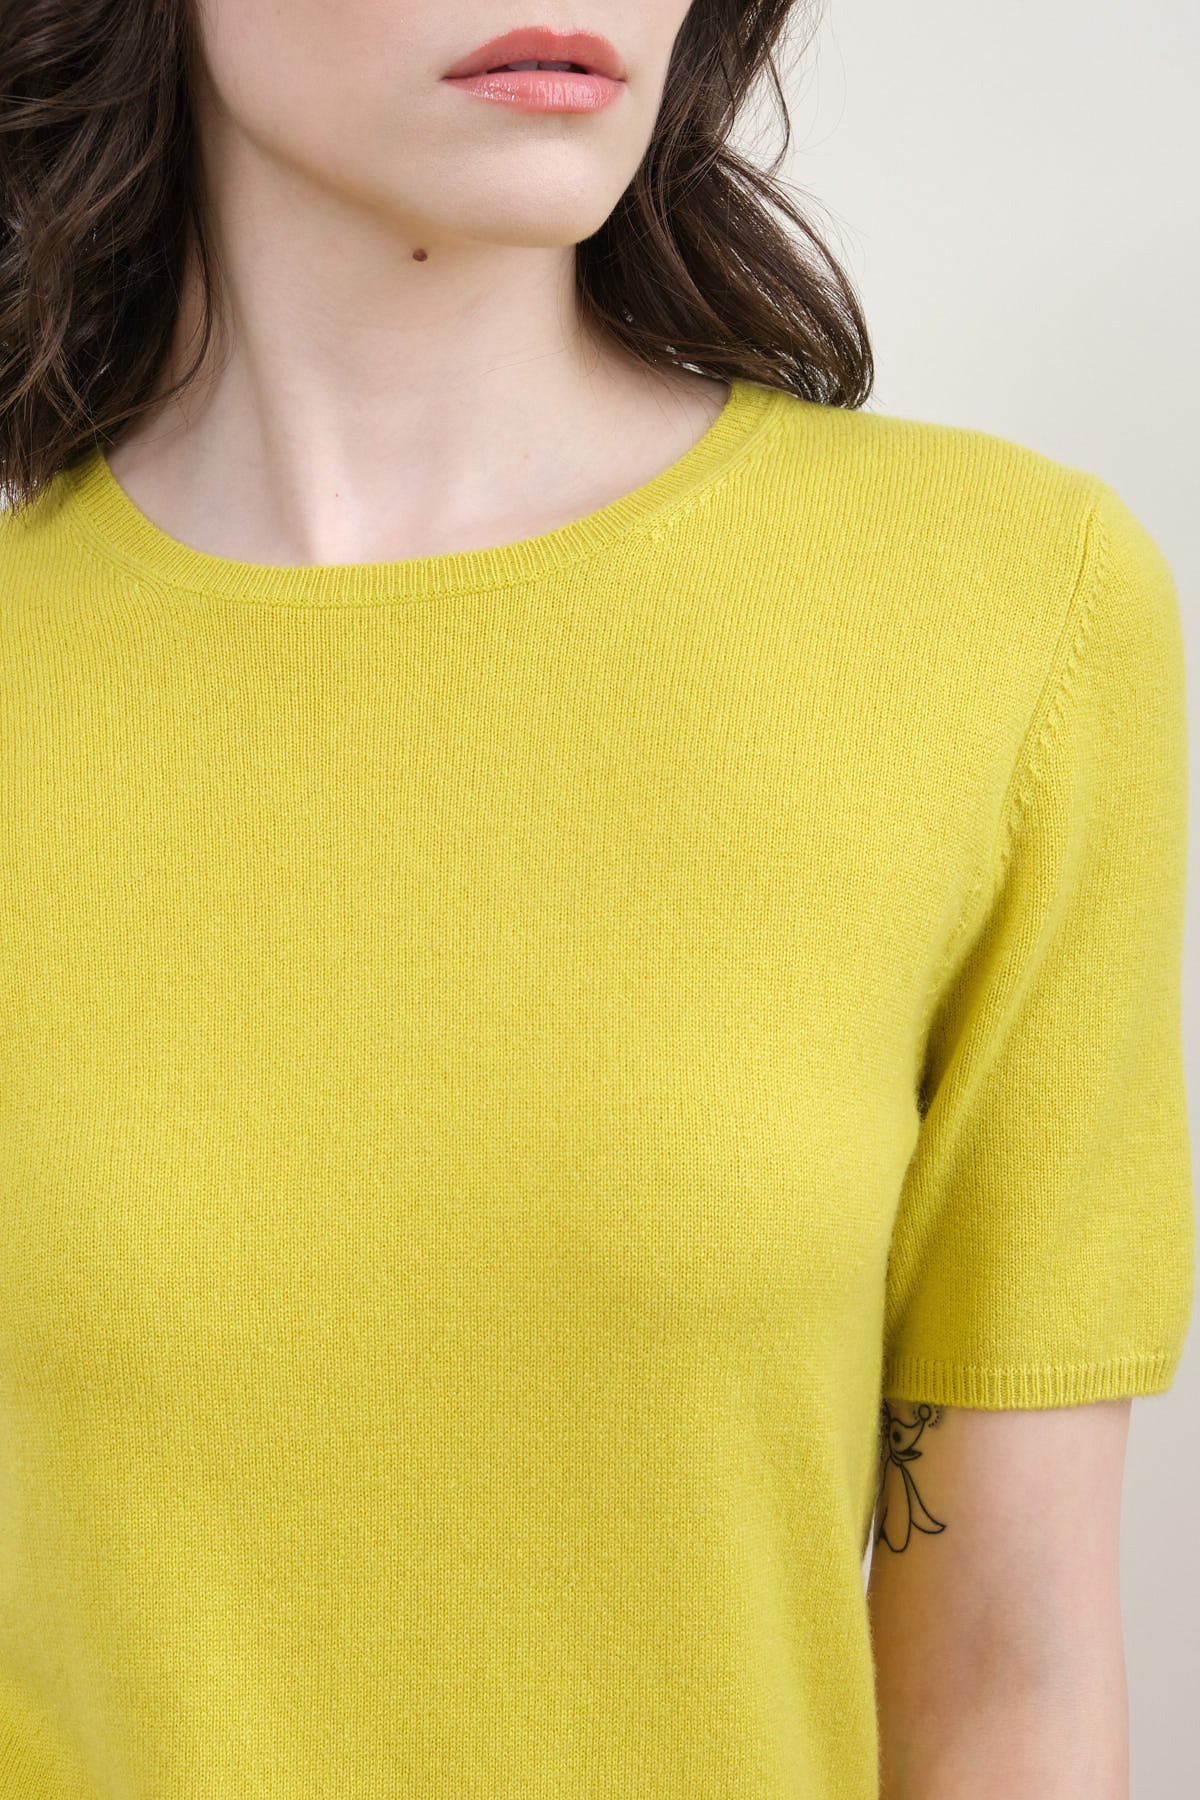 Neckline on Short Sleeve Sweater in Lime